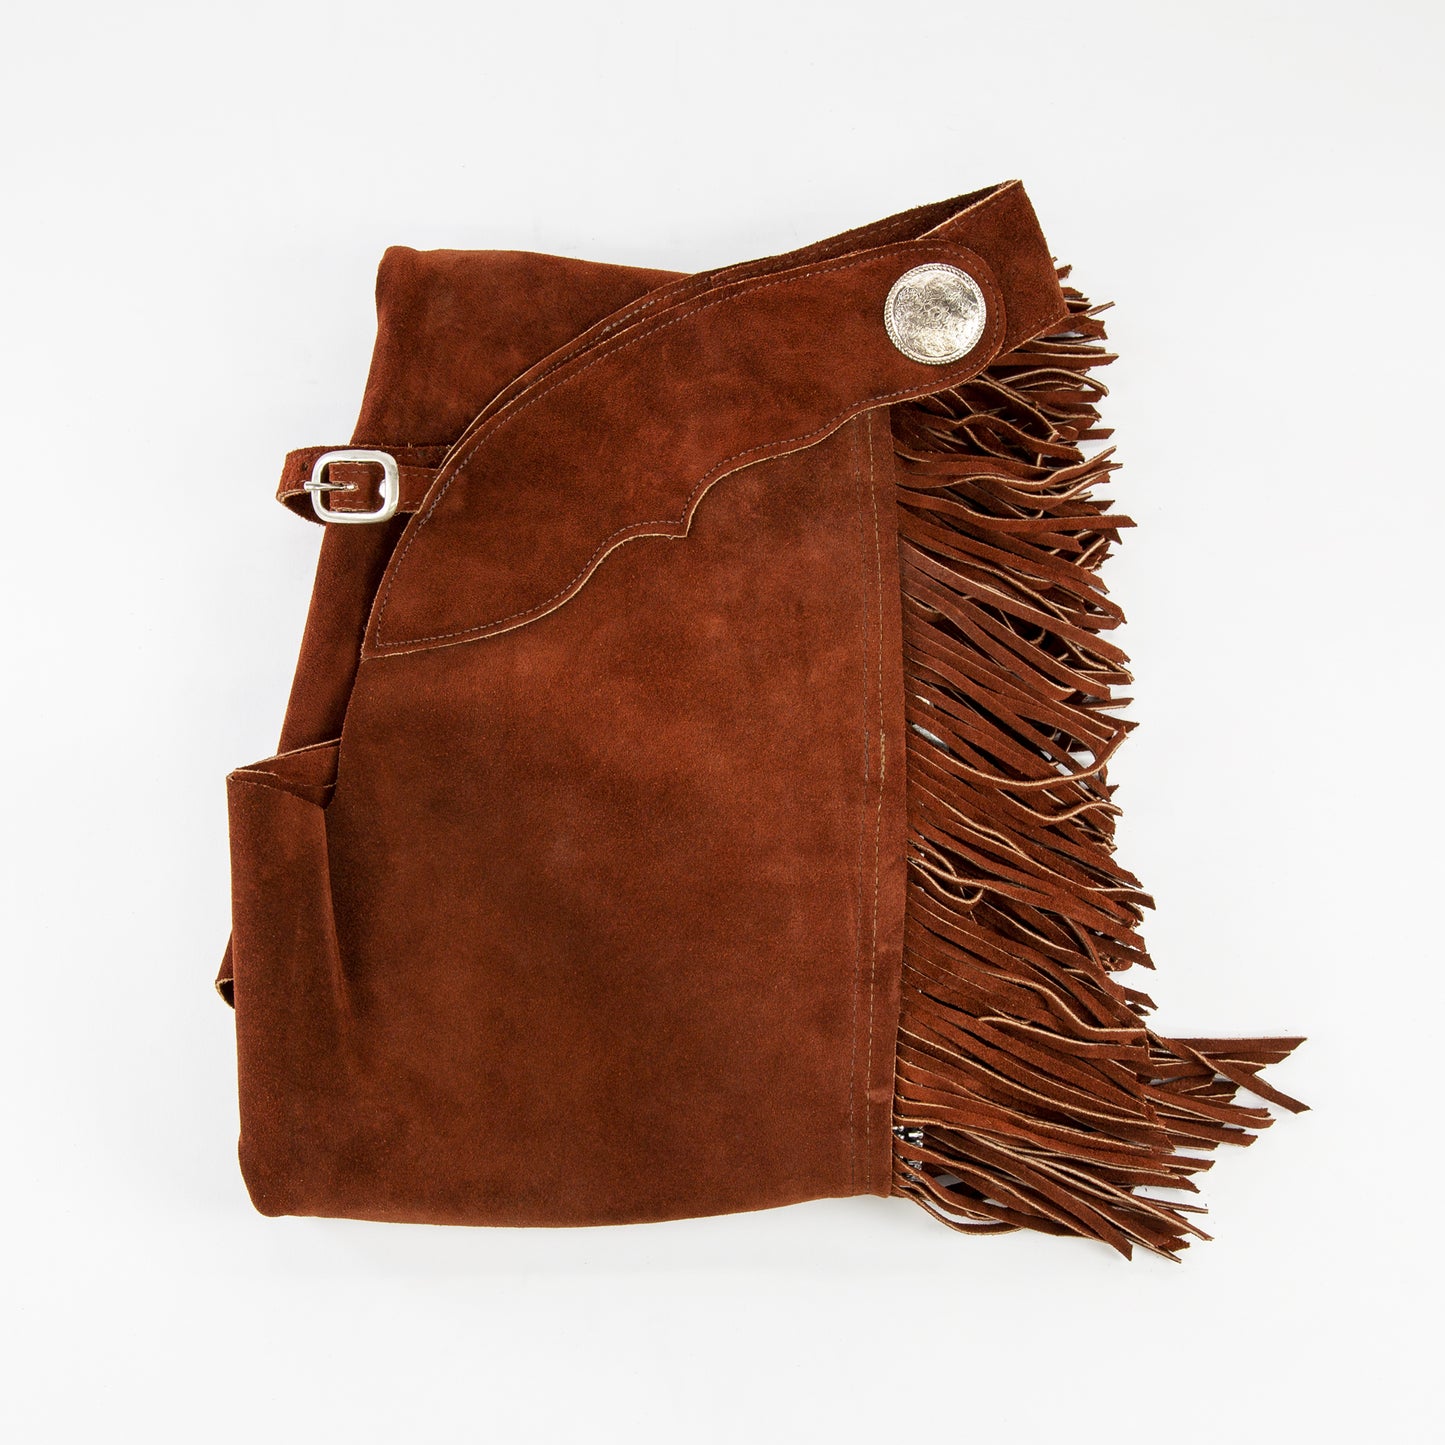 Western Equitation Chaps - Rust Suede - Fringe - Double Concho